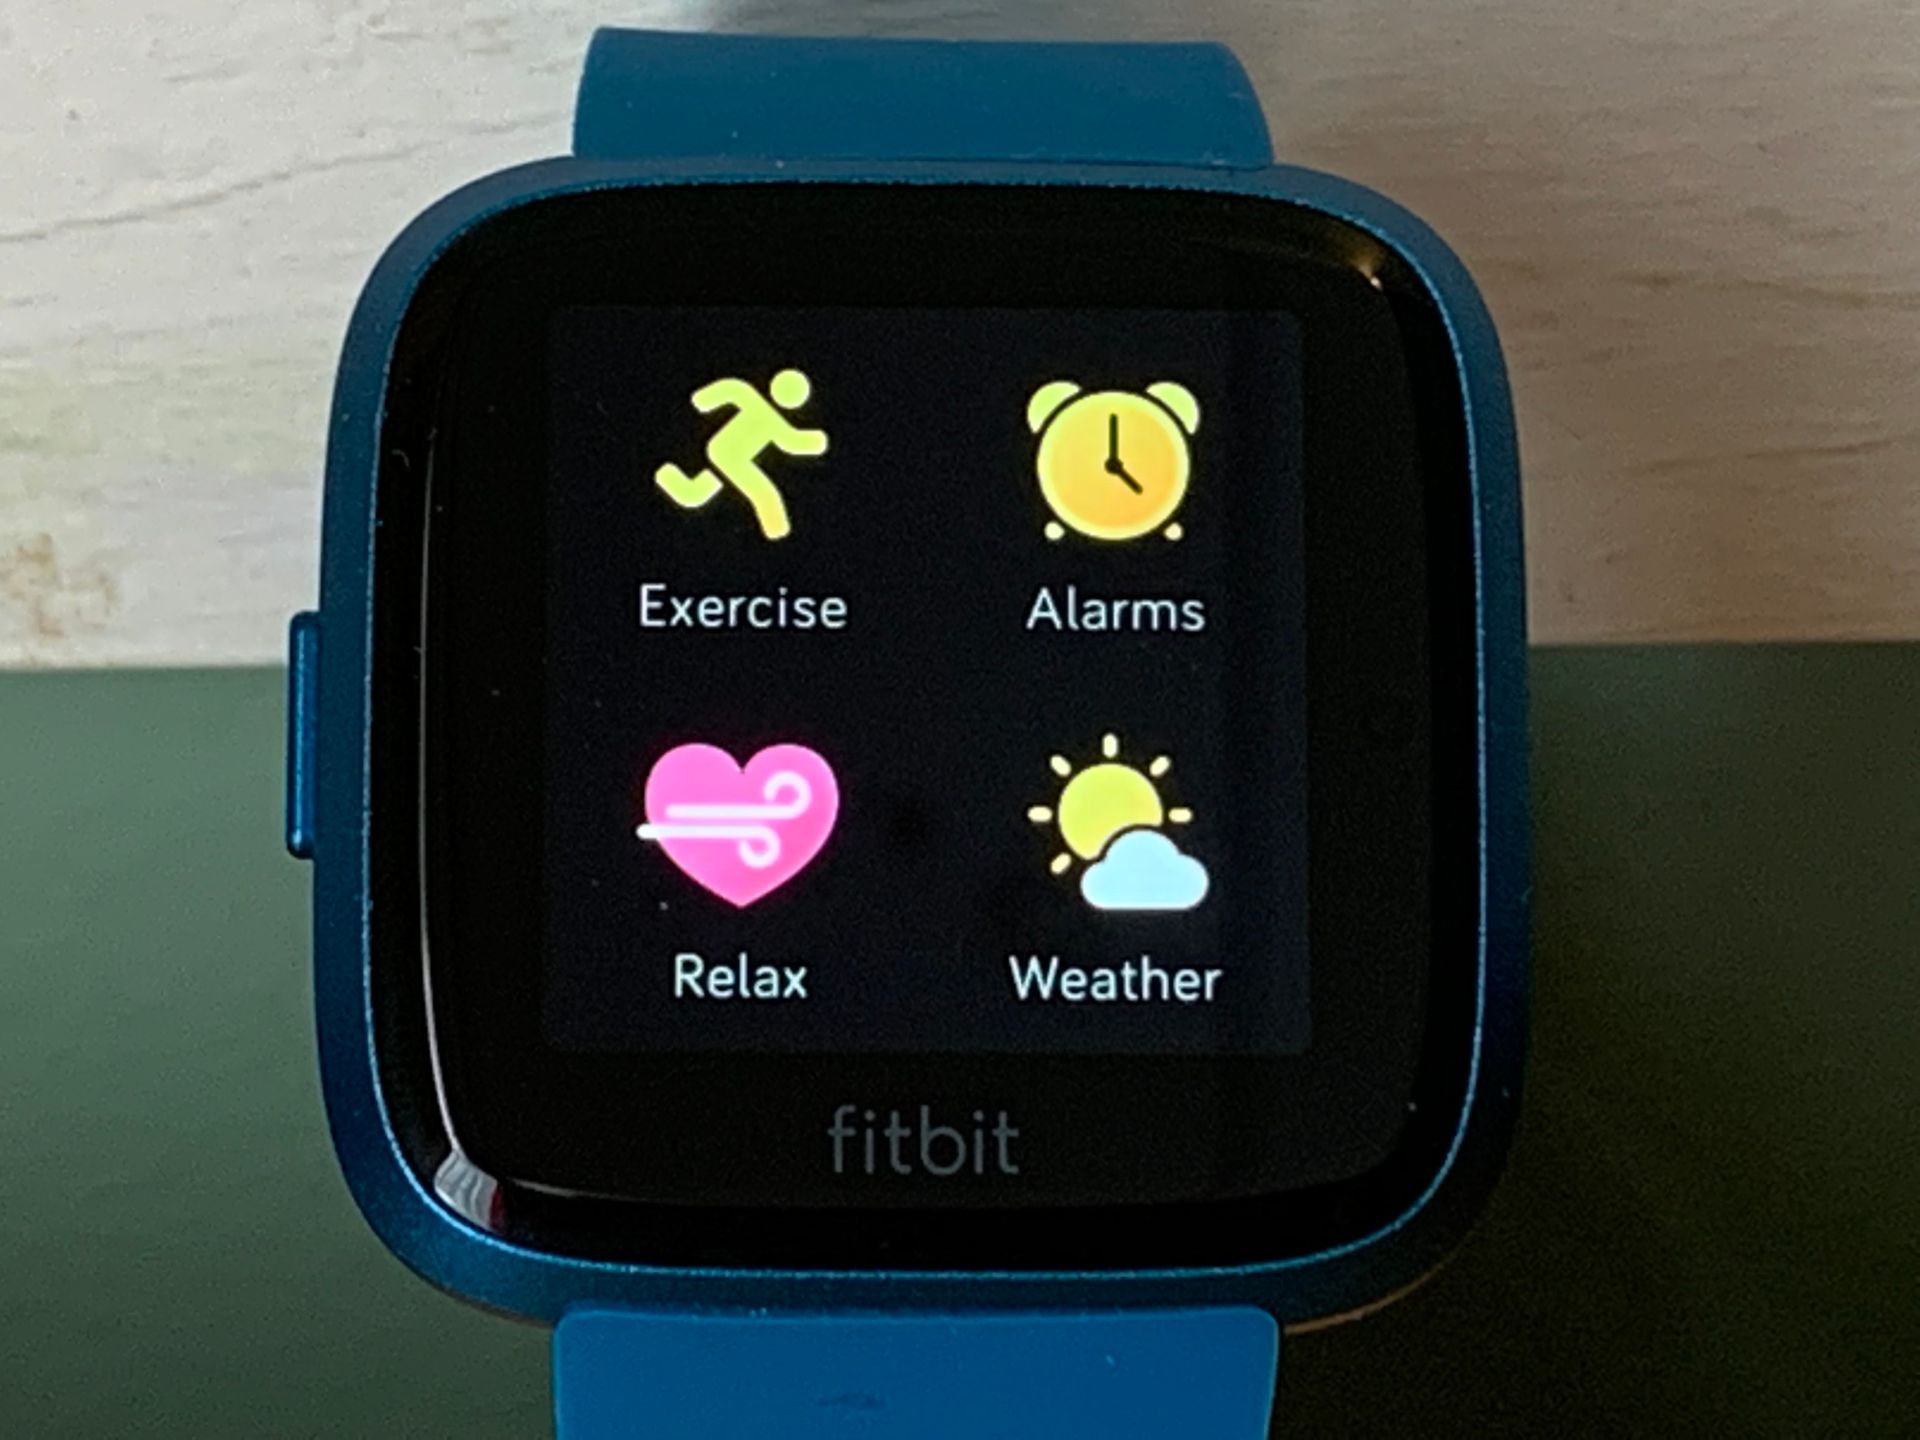 Versa 2 Time Shift: Adjusting The Time On Your Fitbit Versa 2